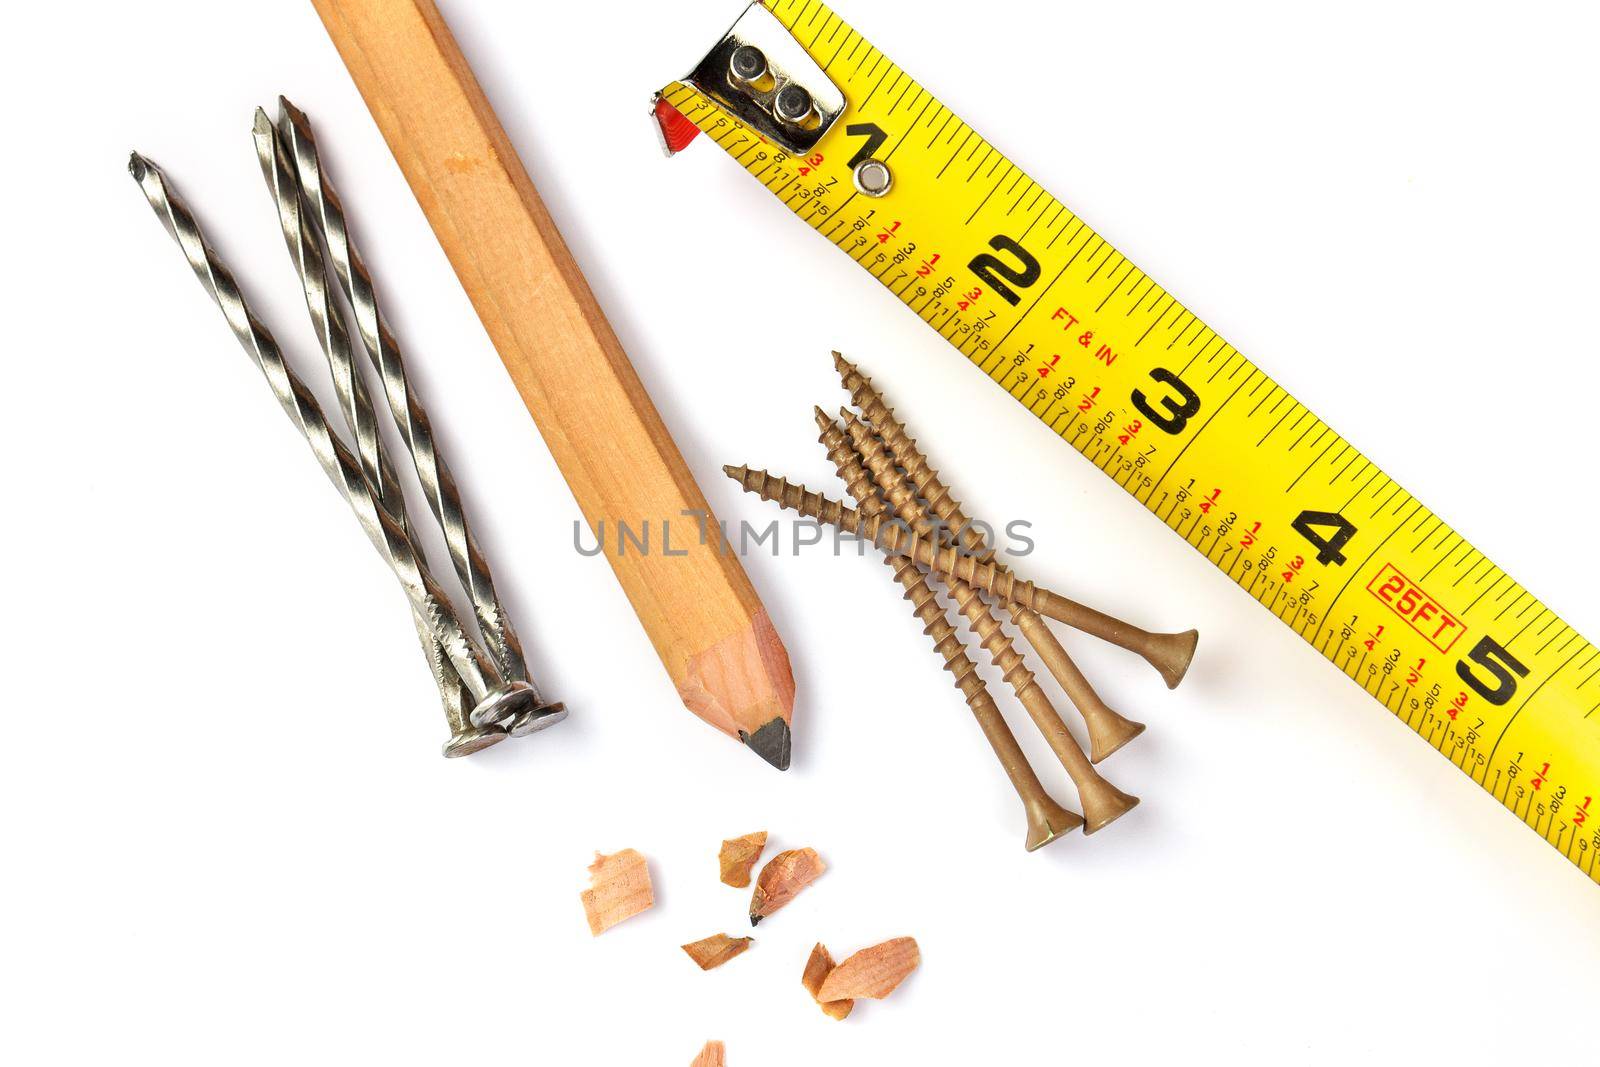 Directly Above Close up of a Carpenter's Pencil with Sharpening Shavings, Tape Measure, Framing Nails and Deck Screws on a white background. High quality photo